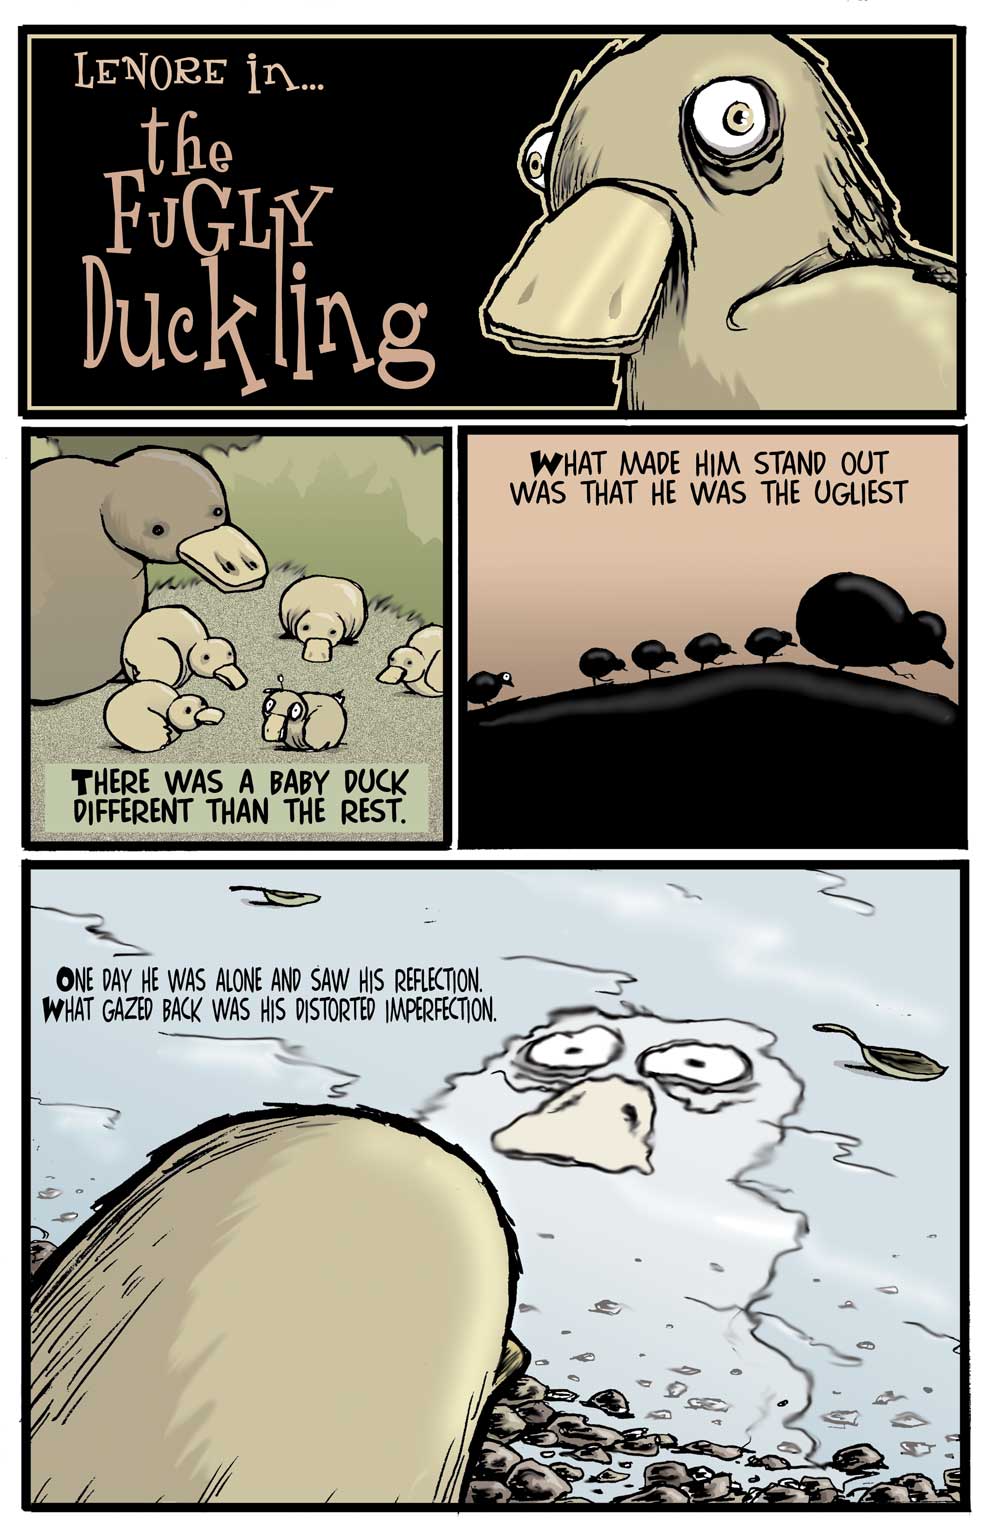 Lenore_Fugly-Duckling-Page-1.jpg